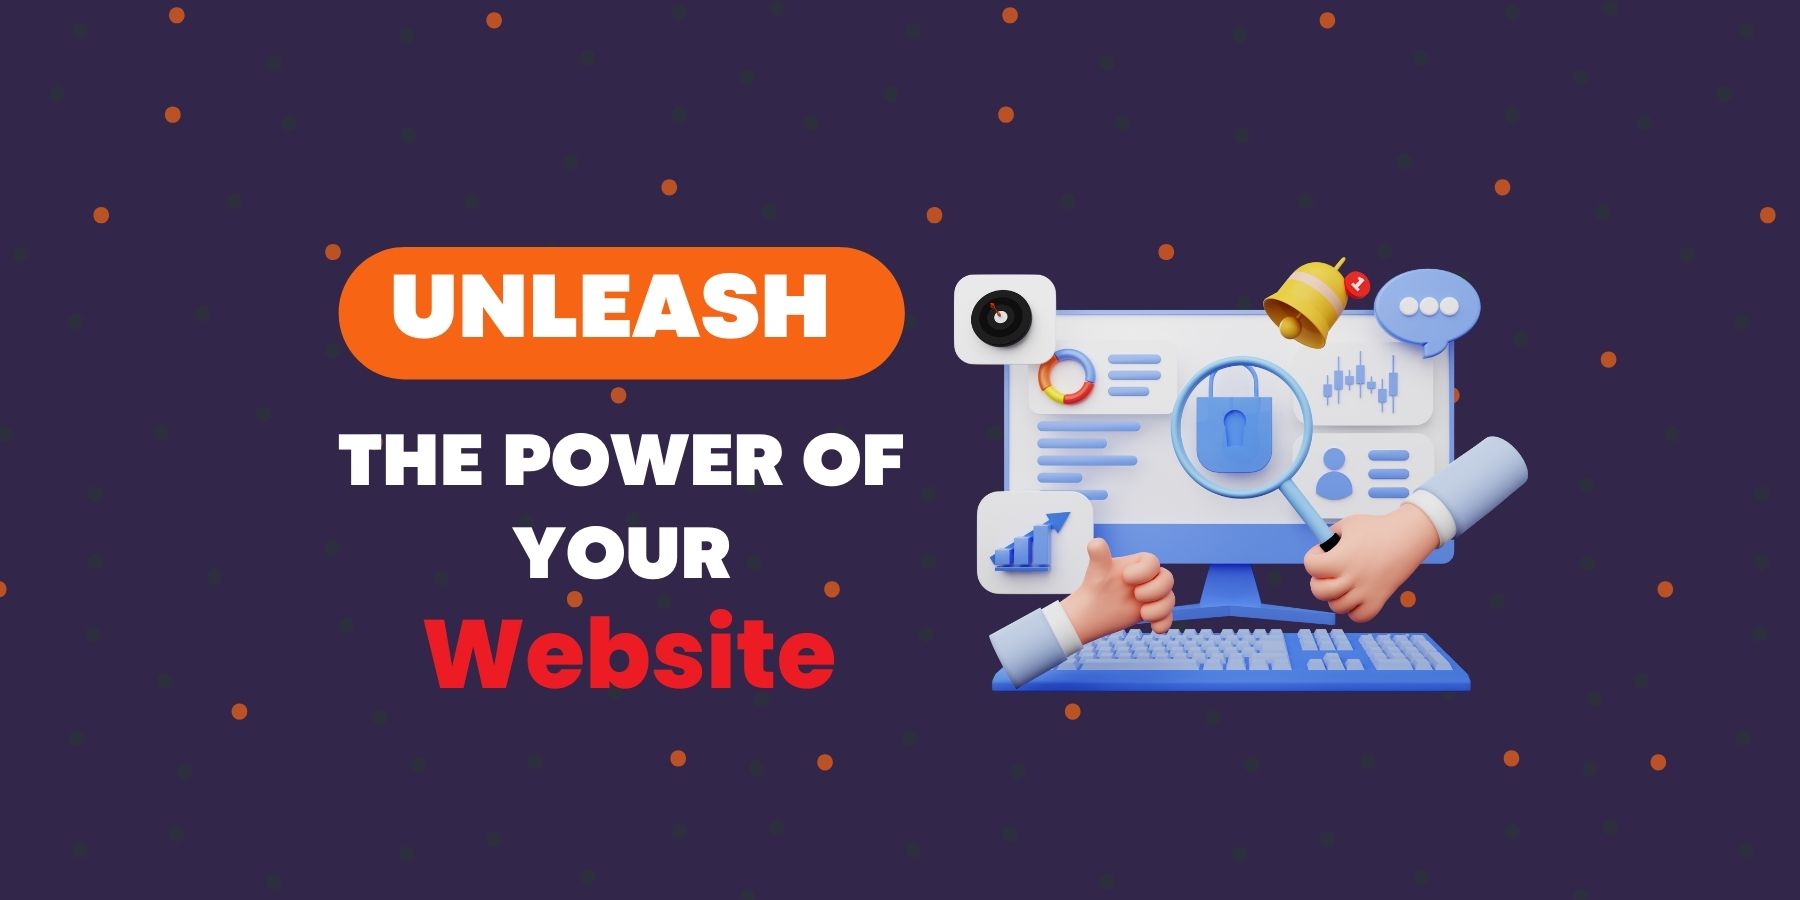 Unleash the power of your website